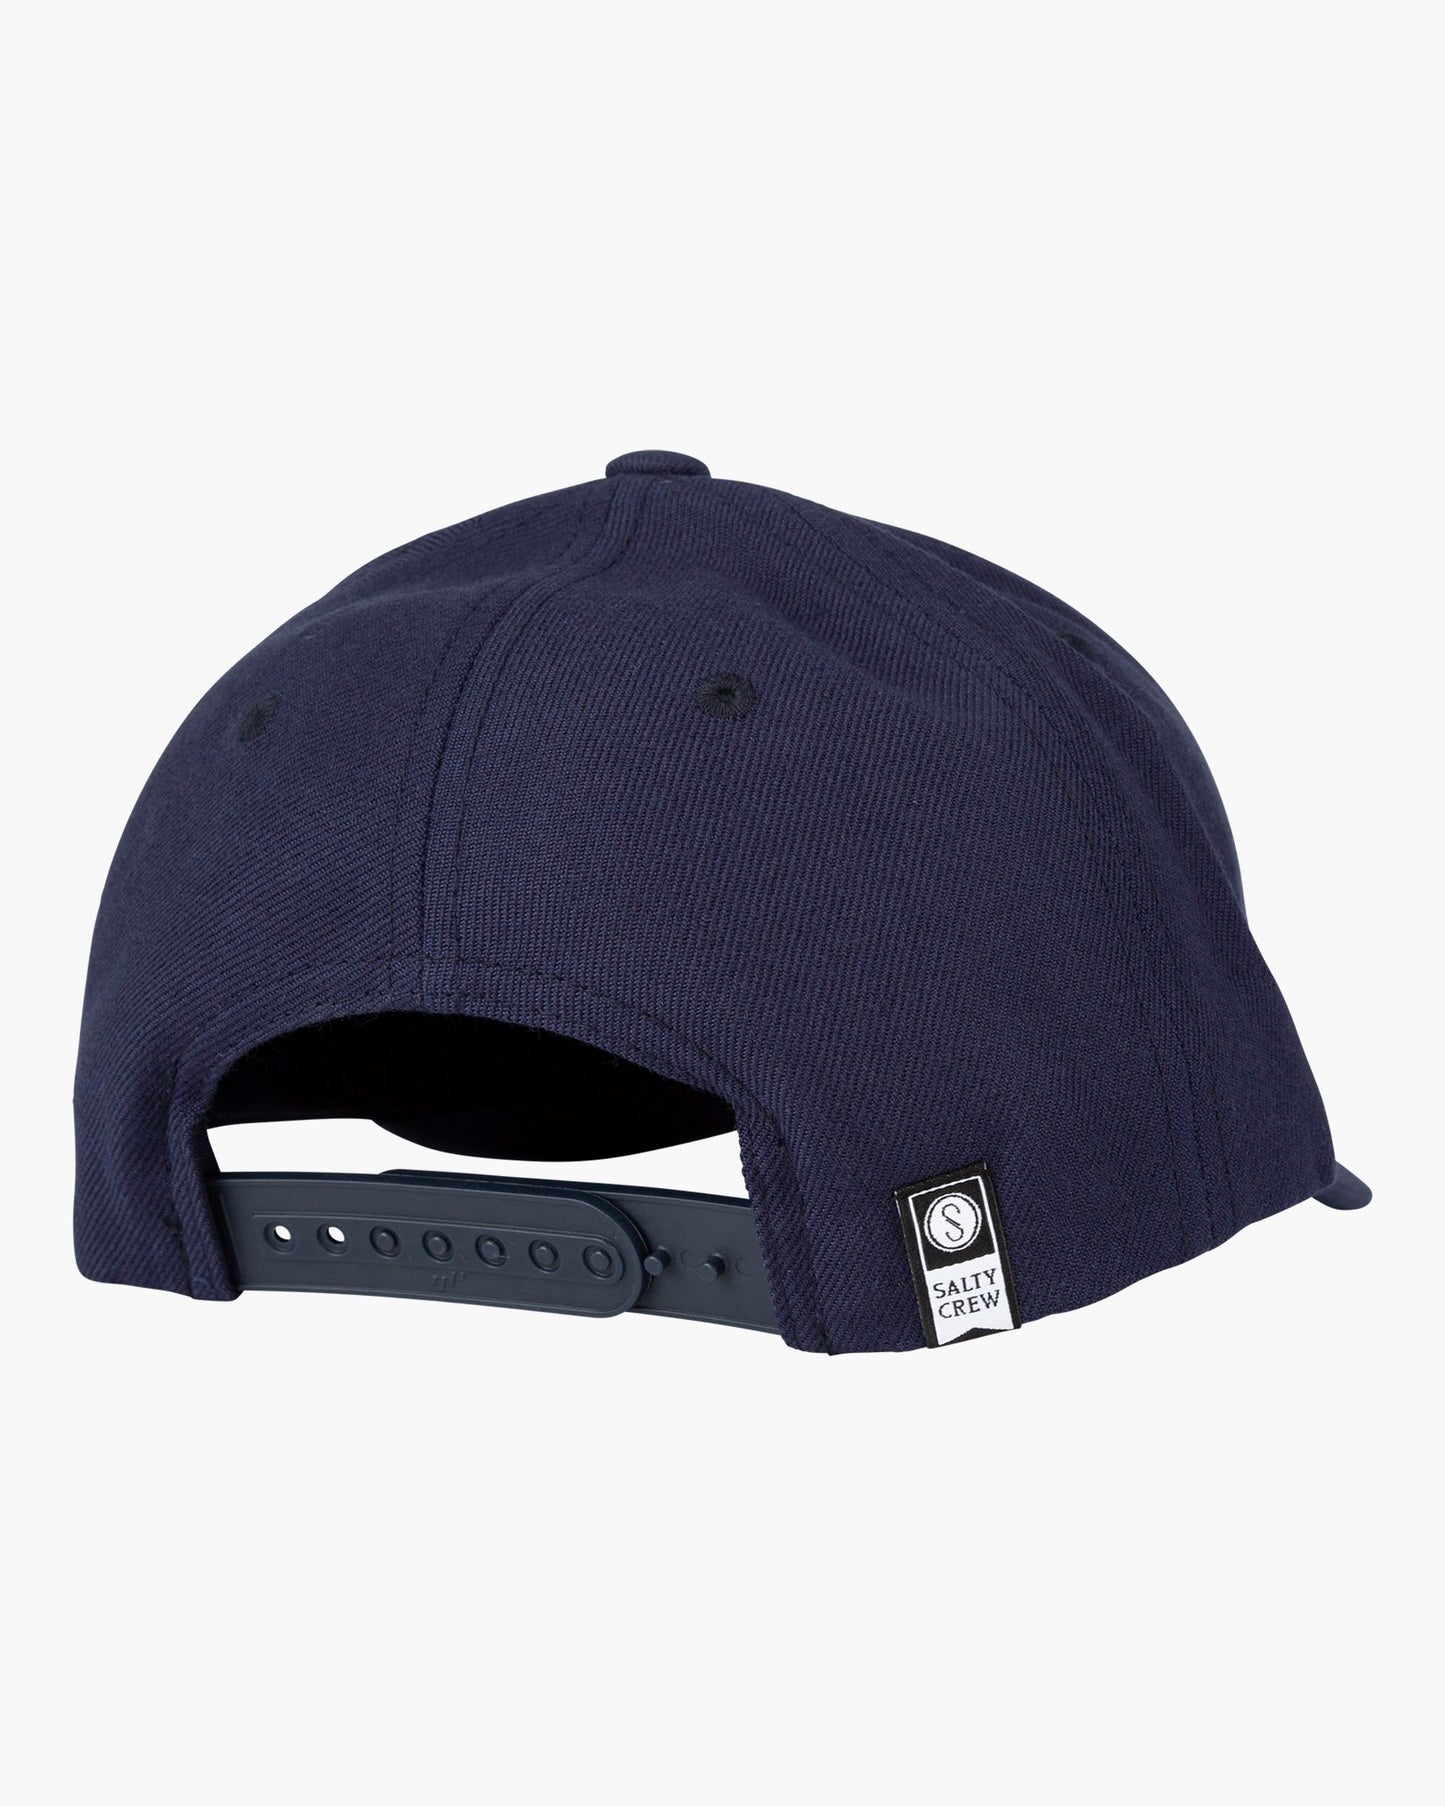 STEALTH 6 PANEL - Navy